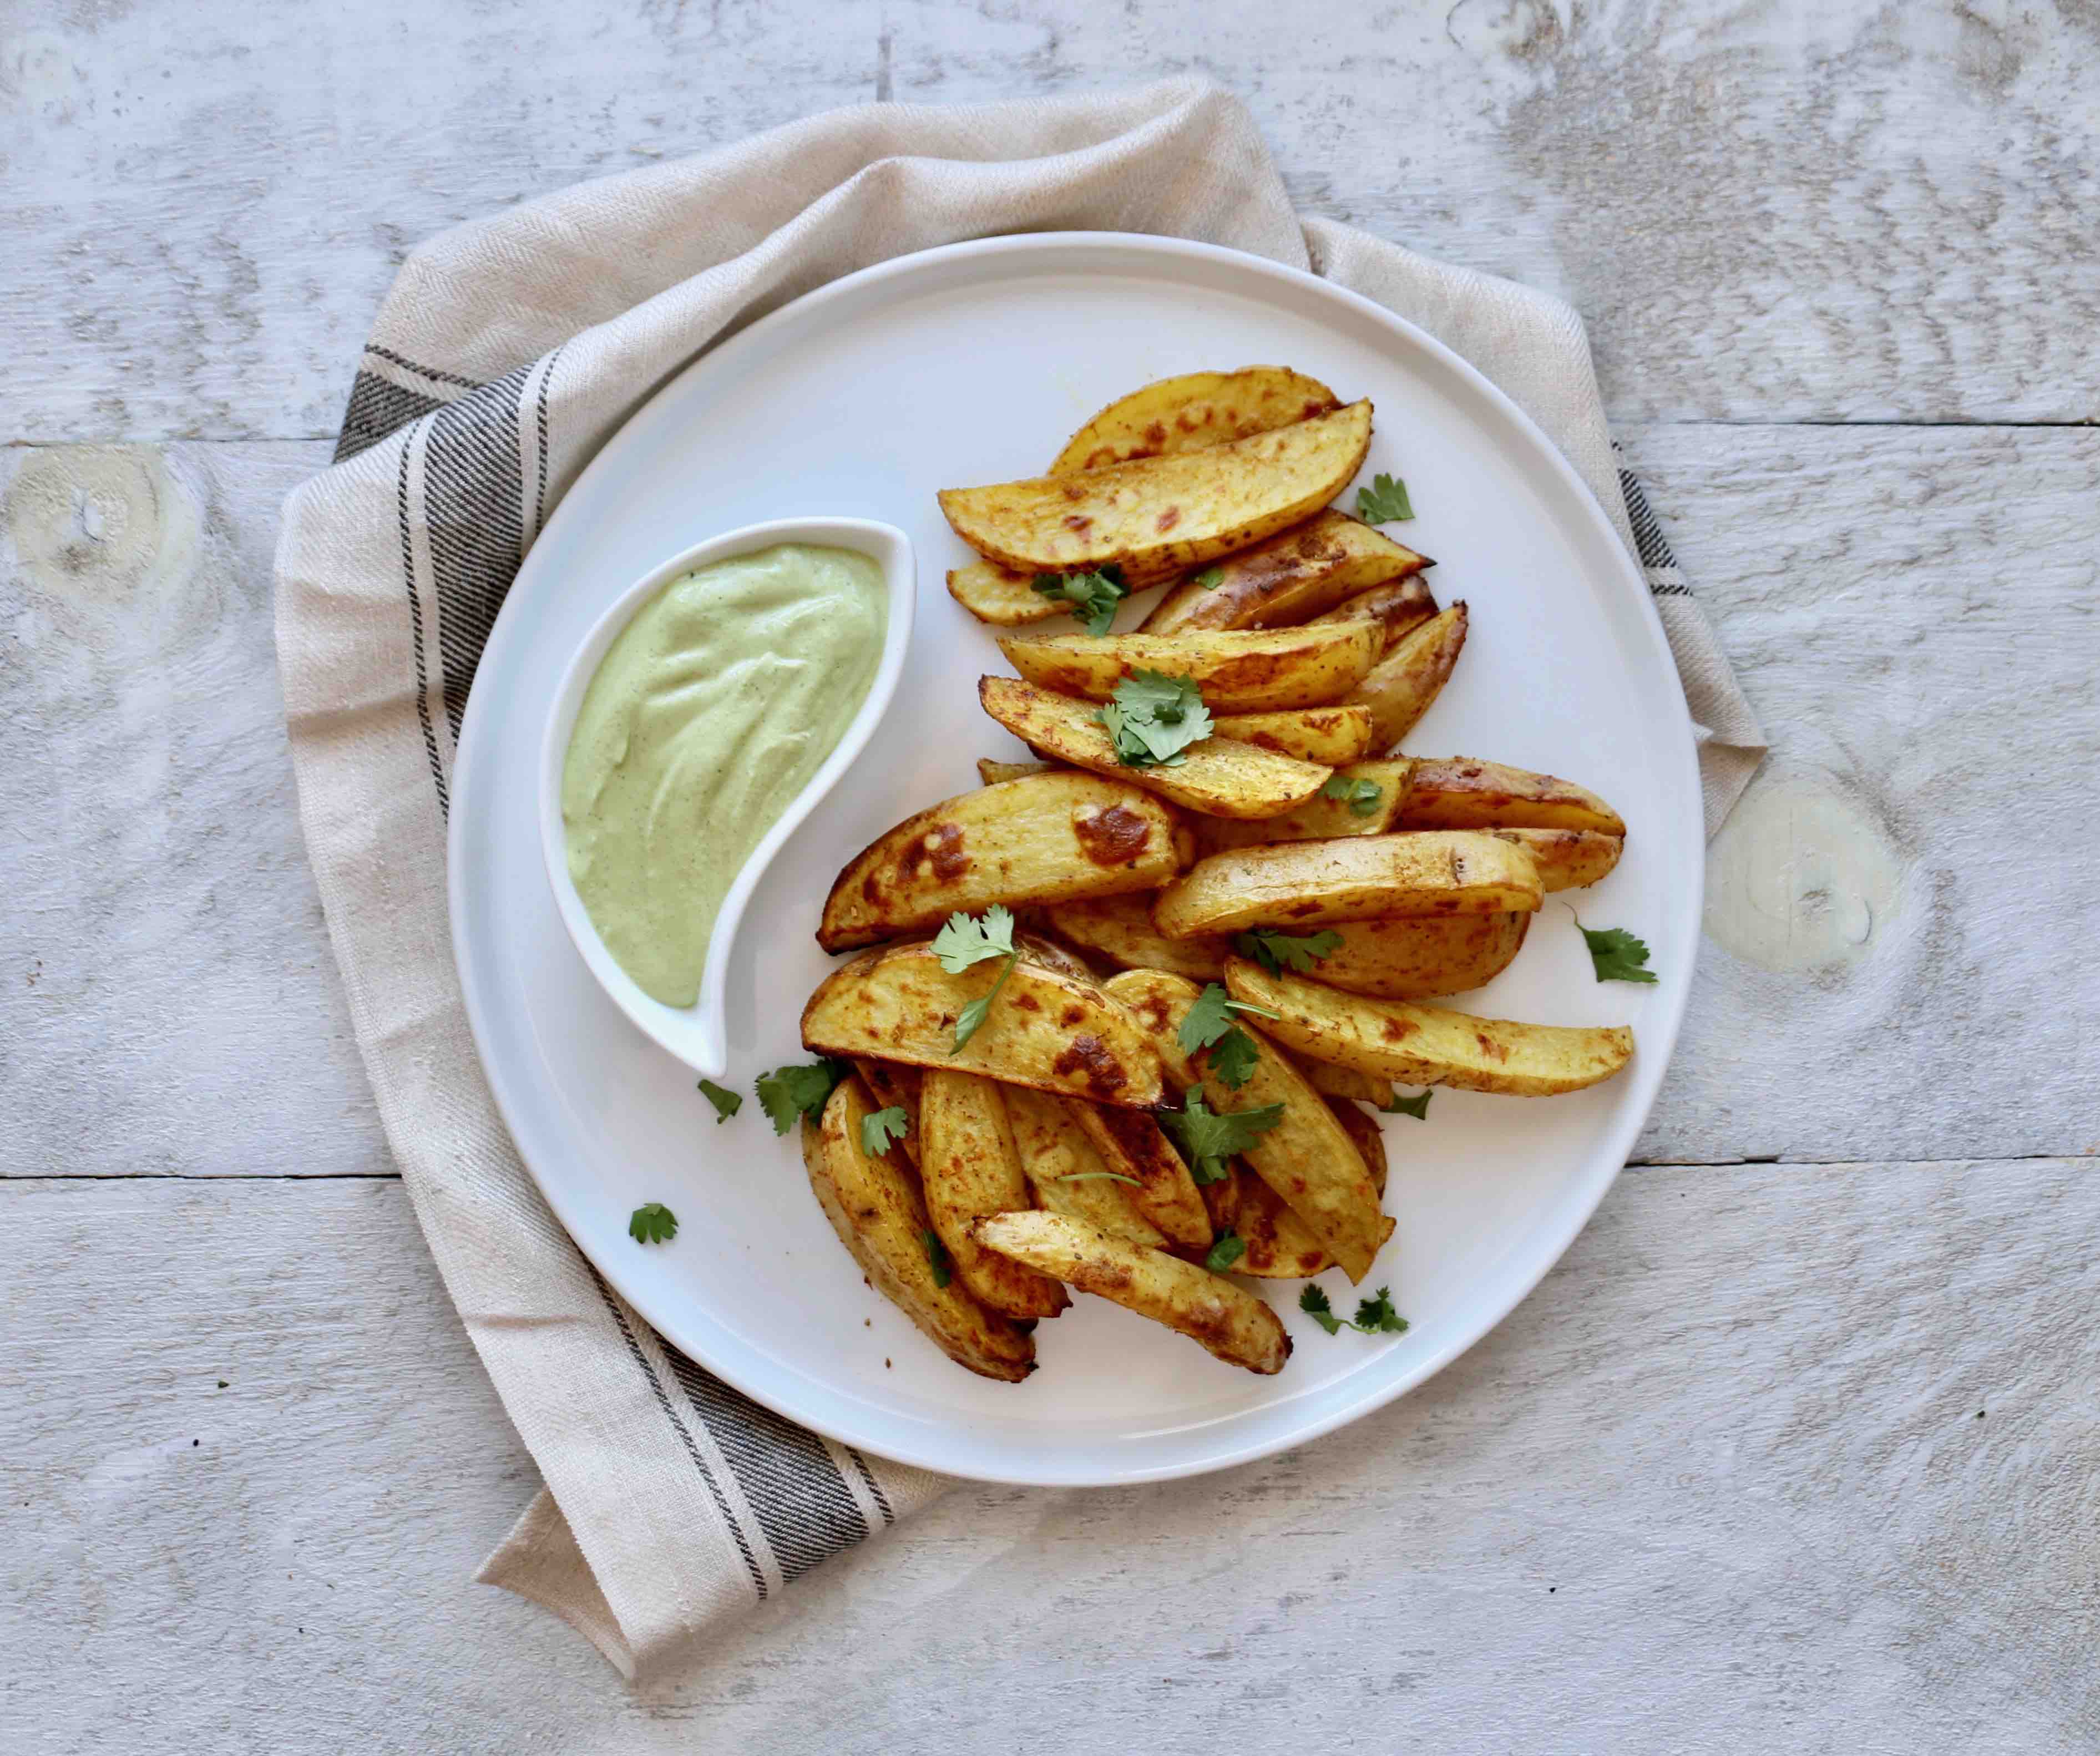 Roasted curry potato wedges with cilantro lime dipping sauce